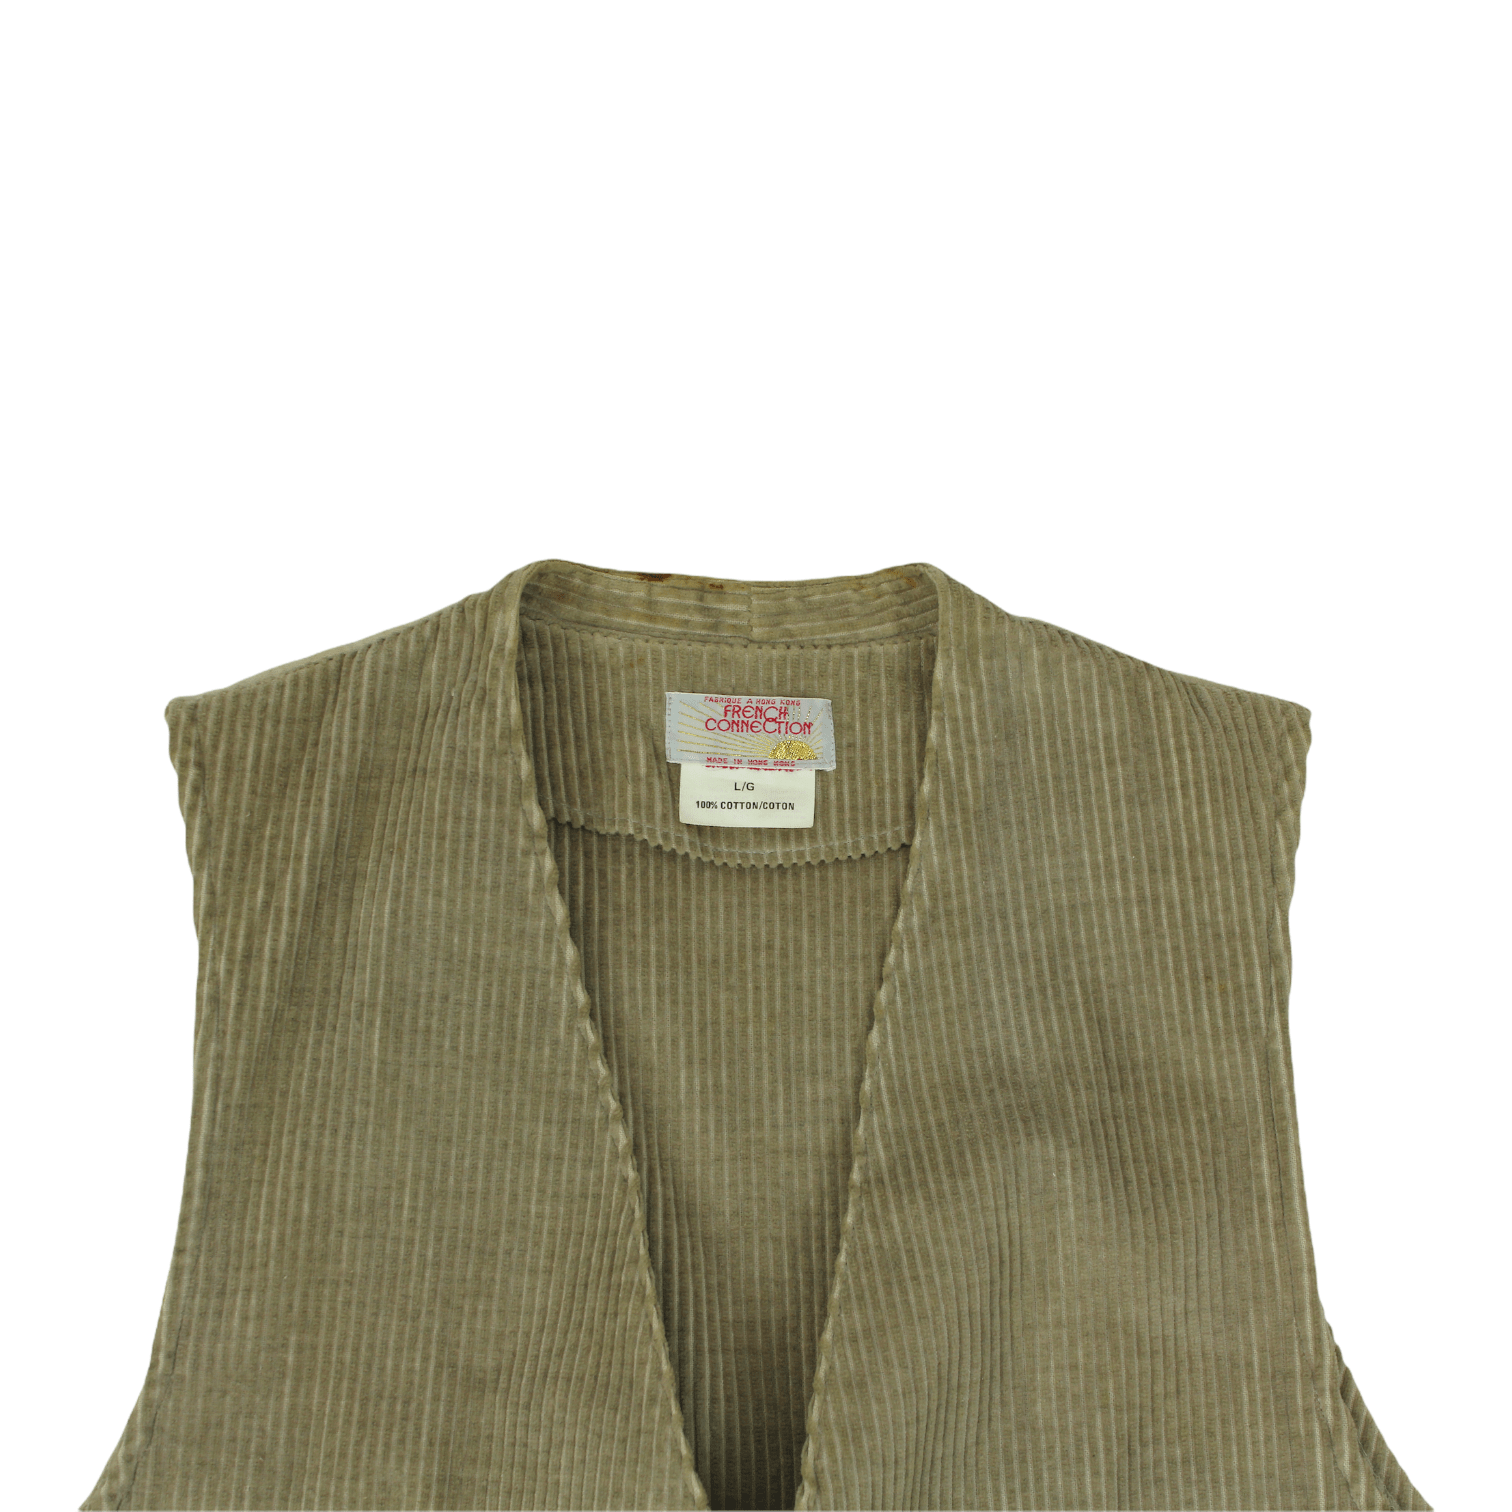 Vintage French Connection Brown Corduroy Waistcoat